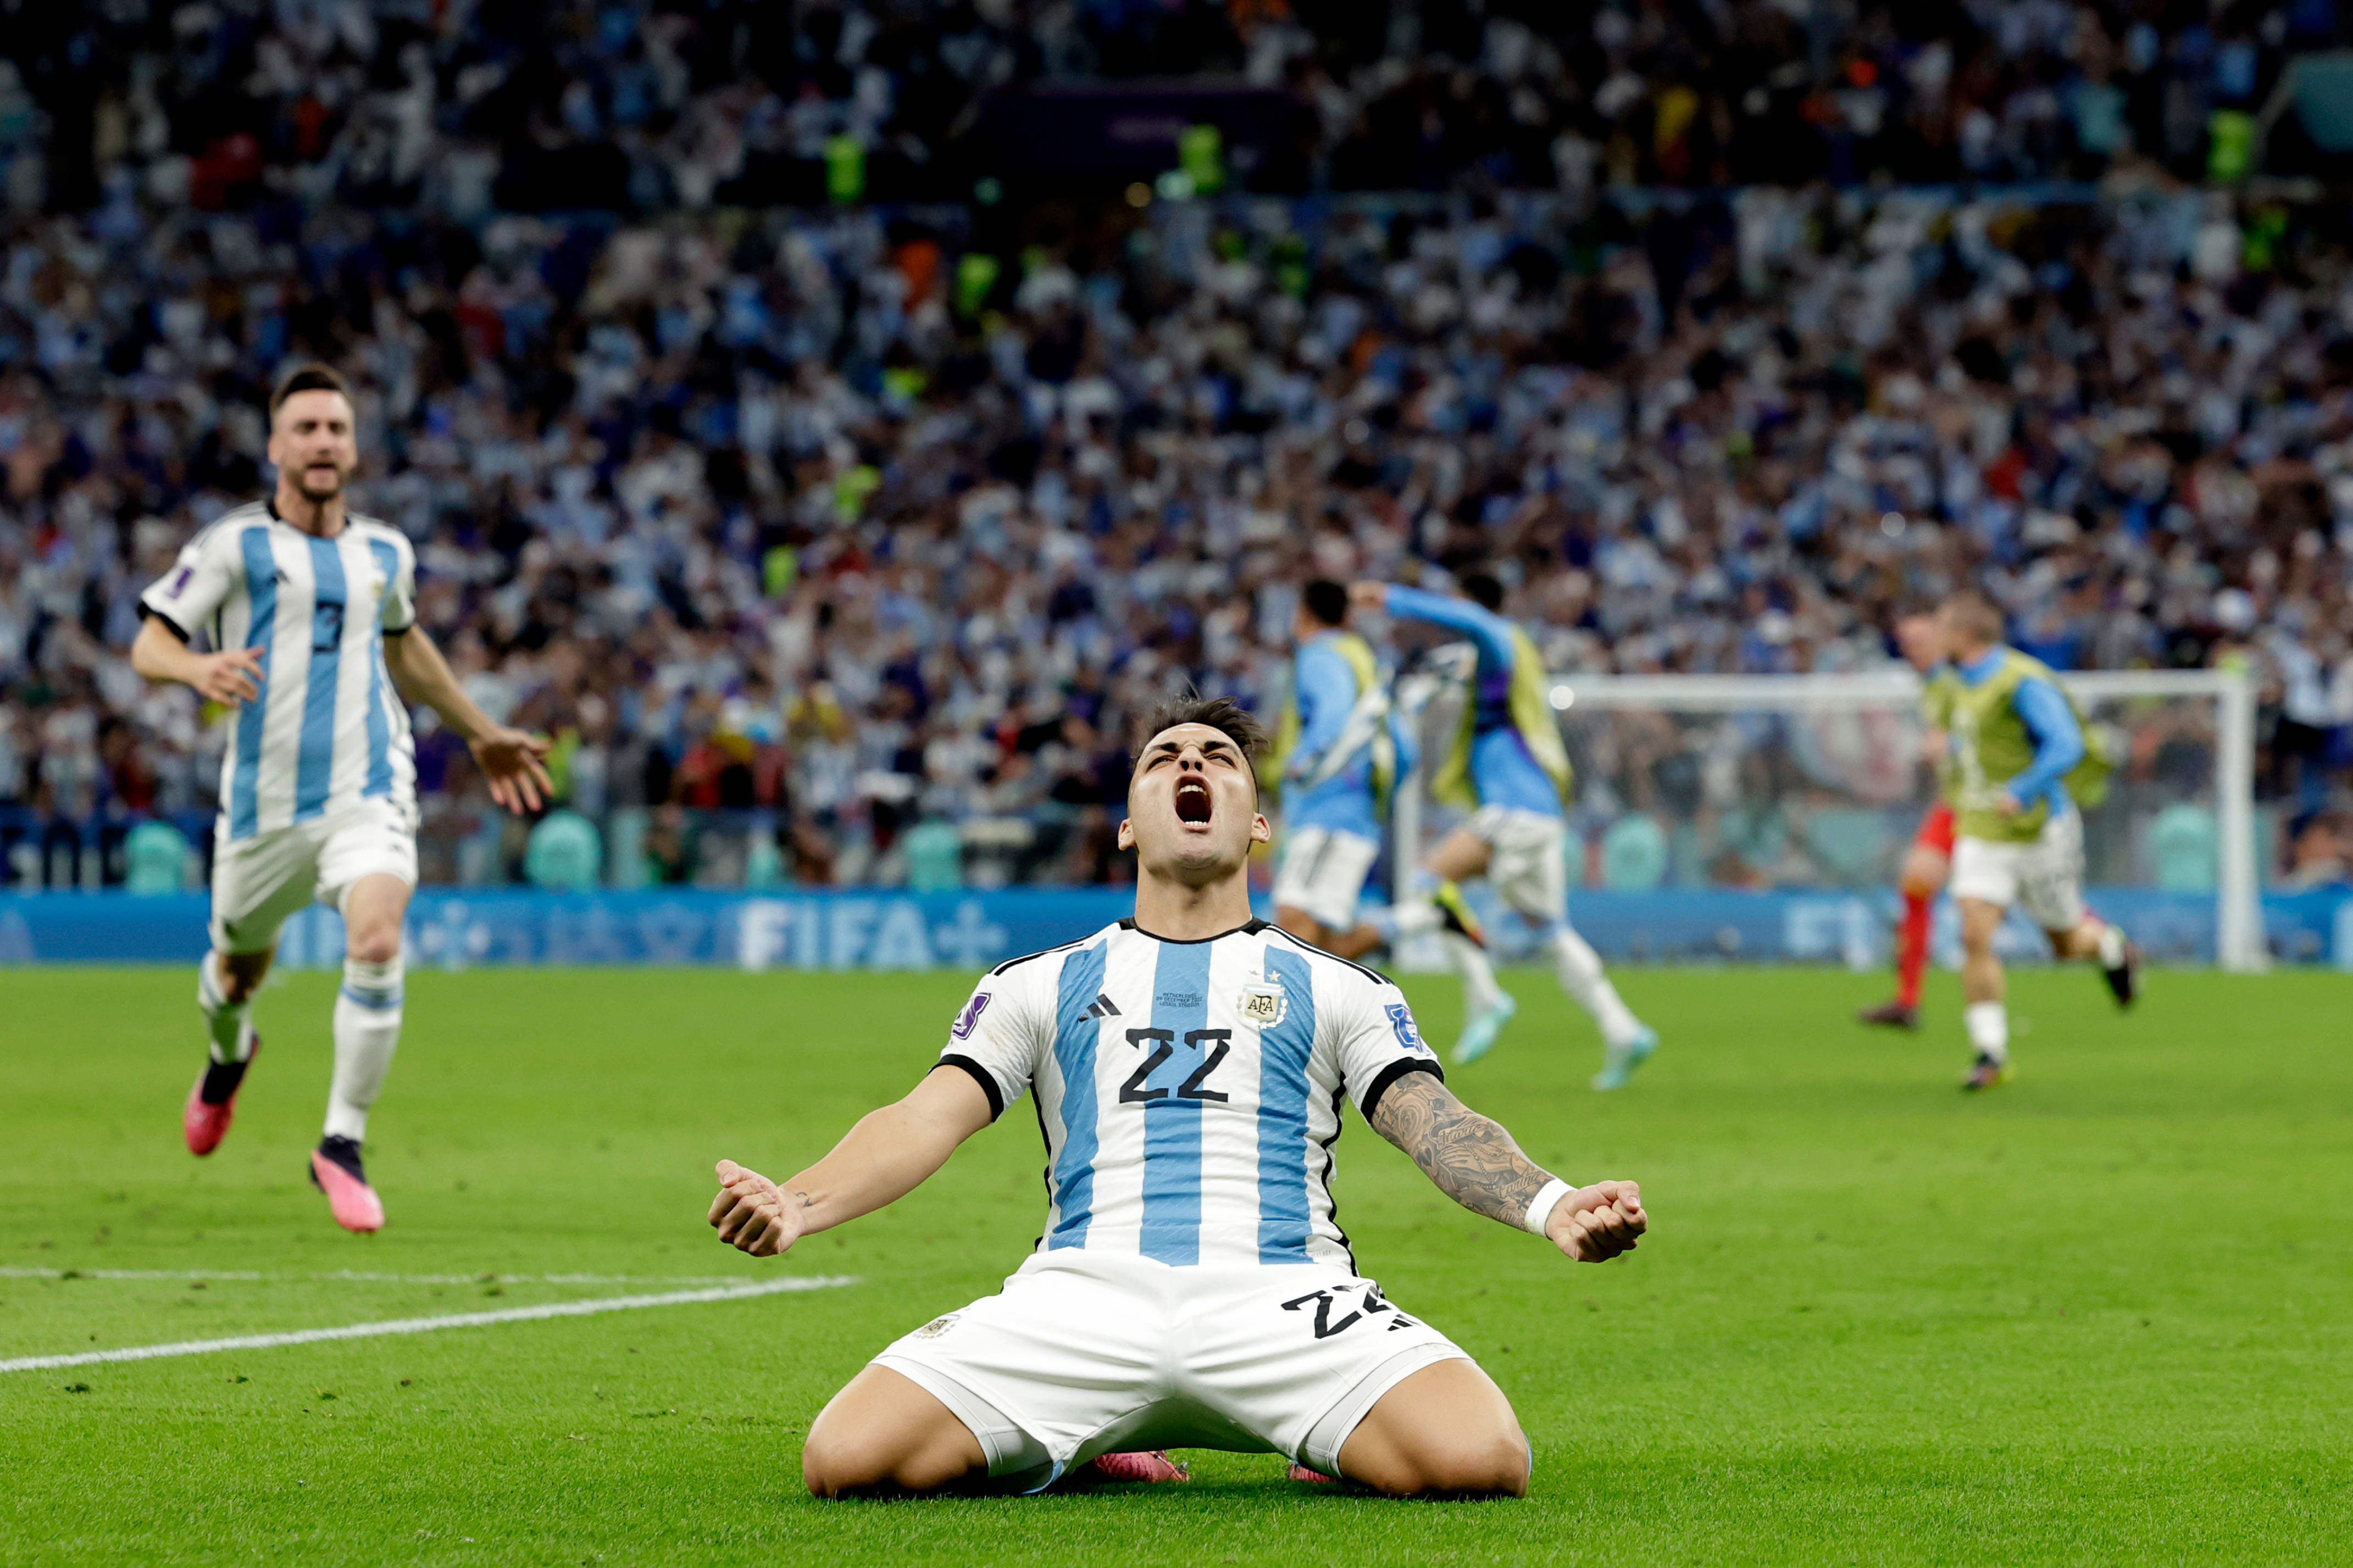 Argentina-Netherlands World Cup Match Leaves Fans Hysterical on
Twitter